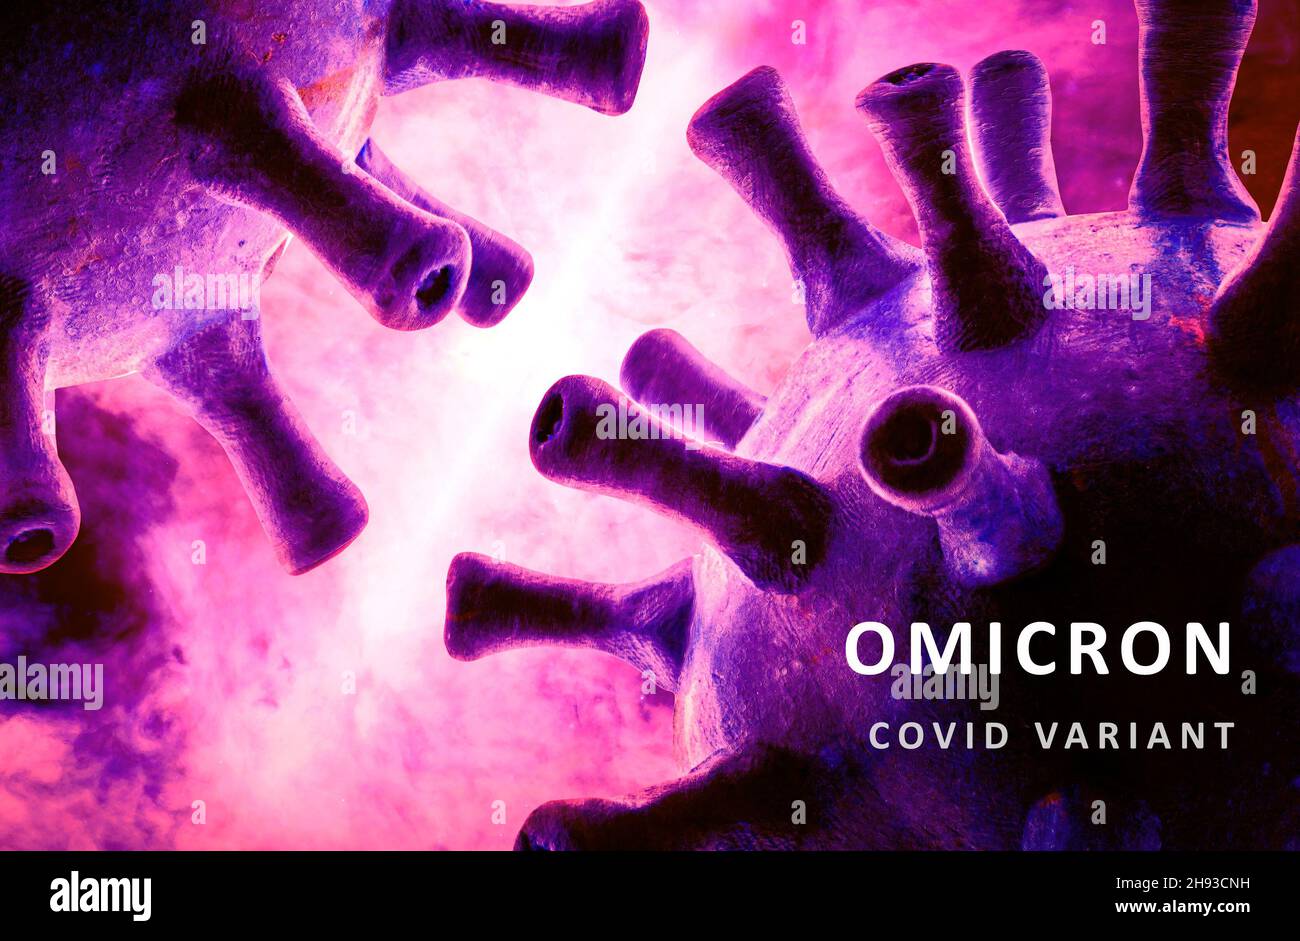 Omicron COVID-19 variant poster, purple banner with coronavirus germs and inscription. Concept of science, technology, virology, corona virus power, m Stock Photo